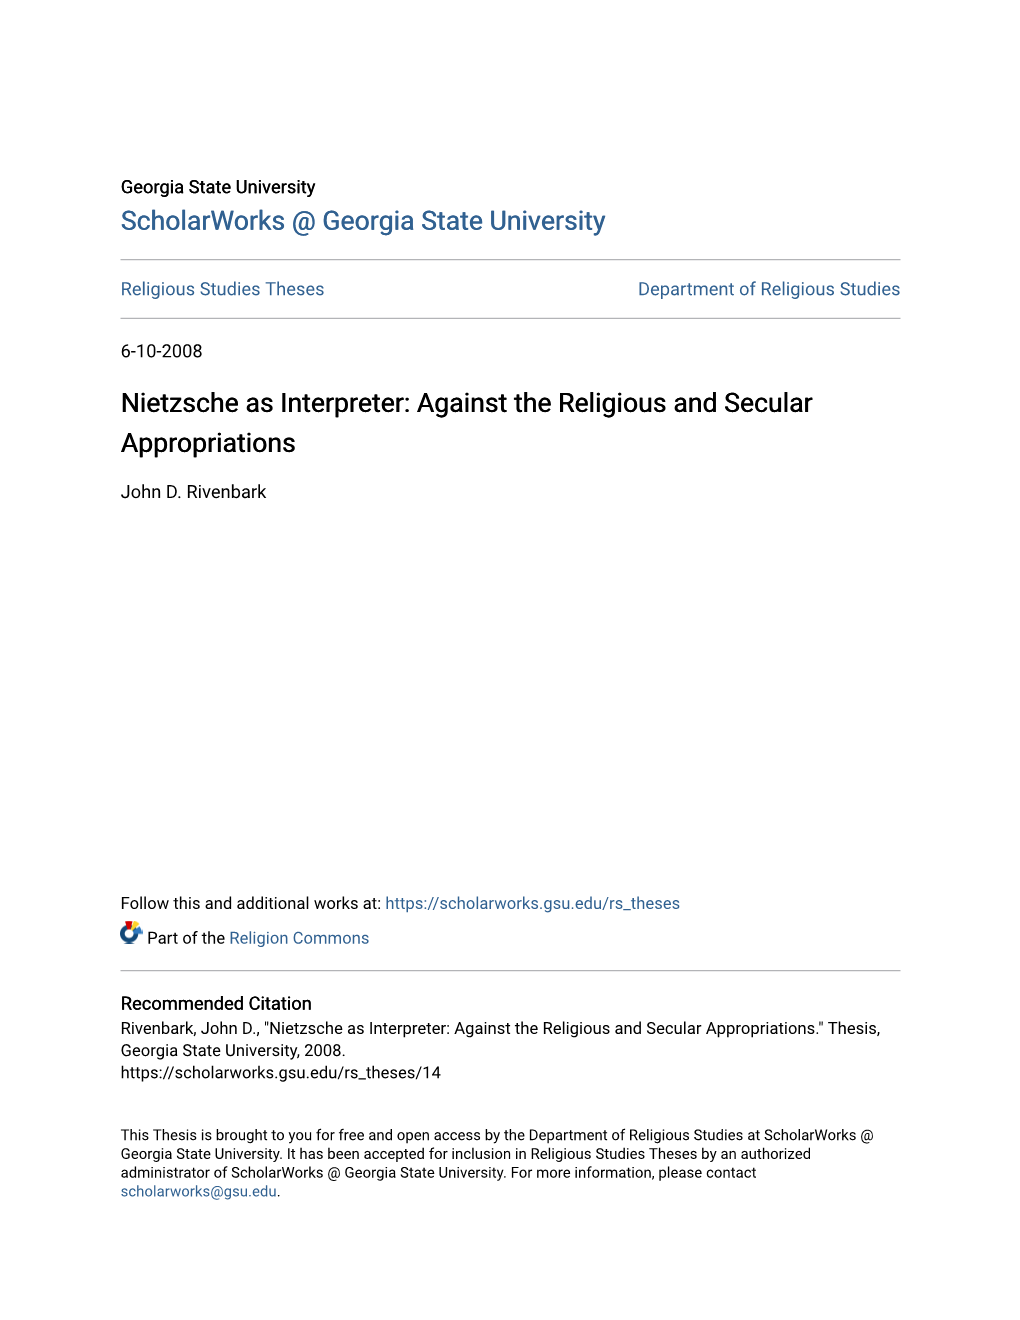 Nietzsche As Interpreter: Against the Religious and Secular Appropriations